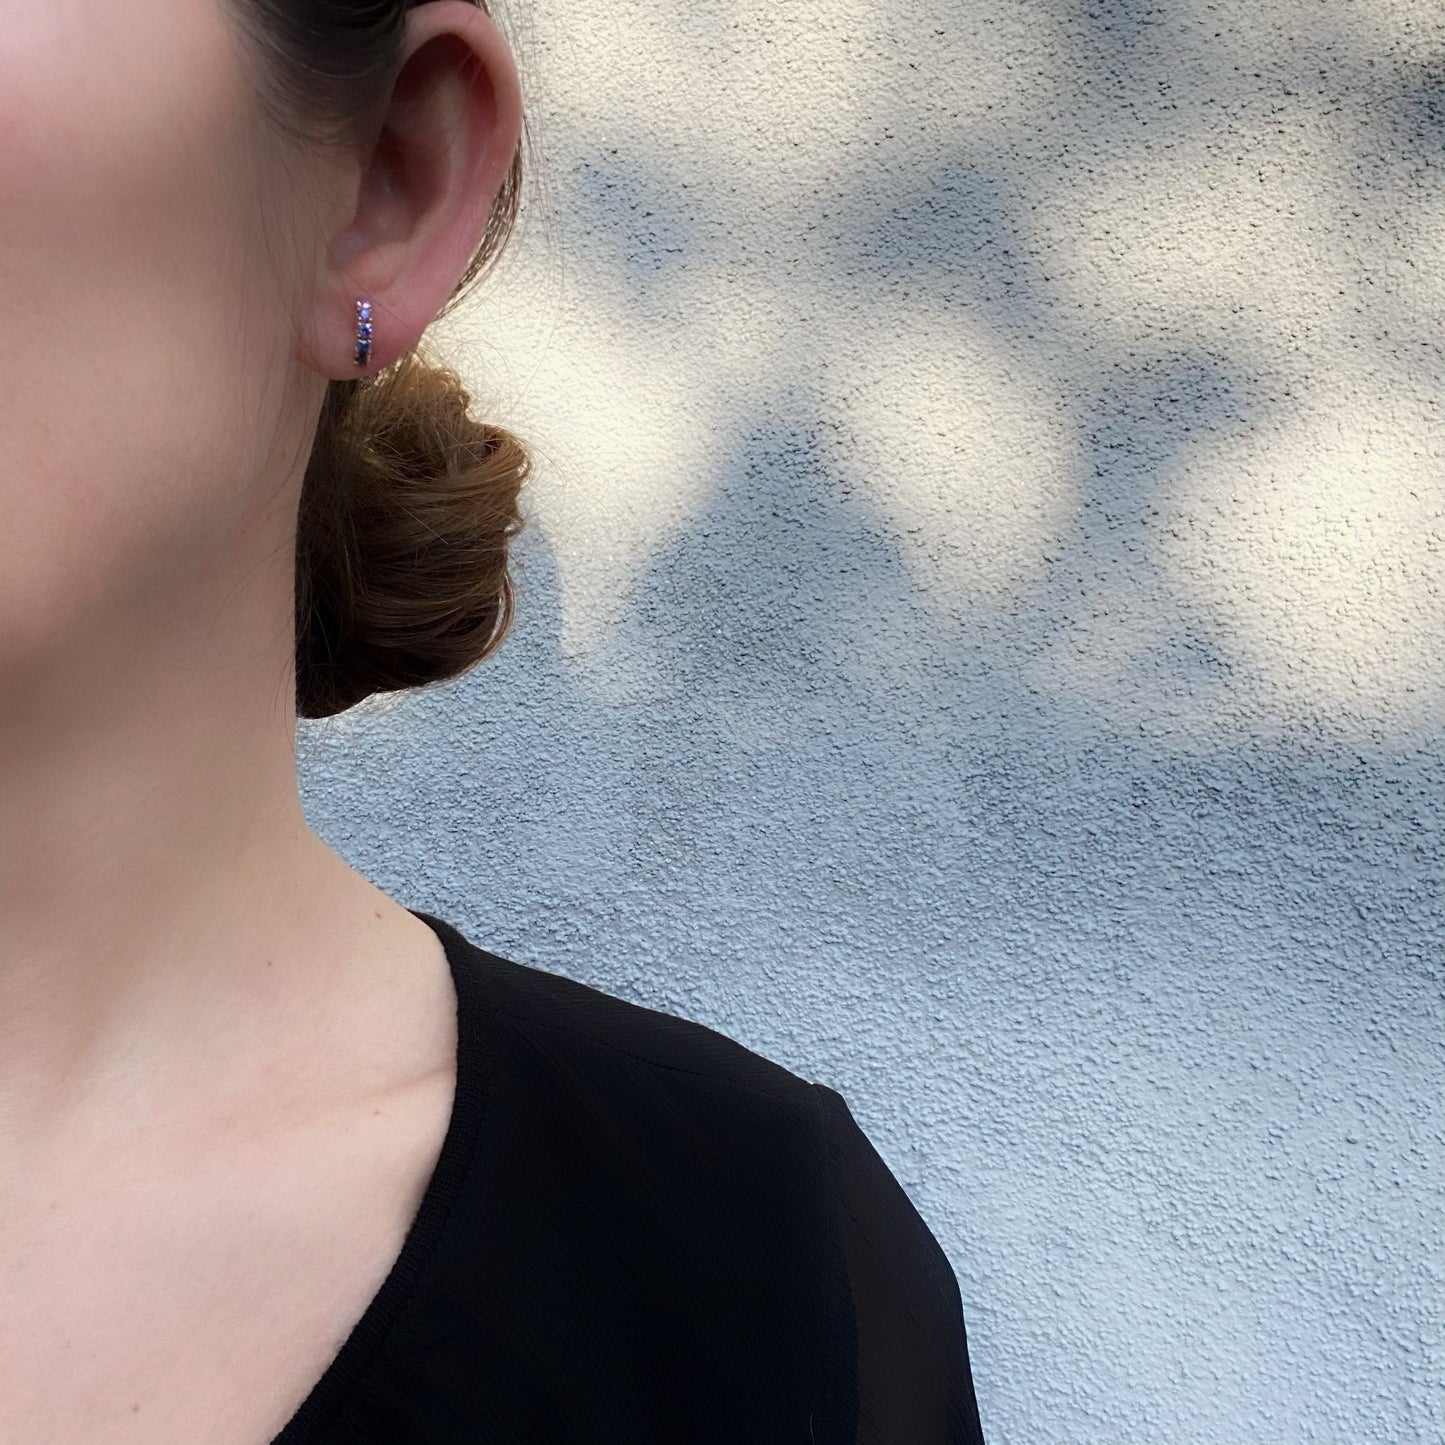 Bridge Ombré Sapphire Stud Earring Singles line + hue collaboration with NIXIN Jewelry